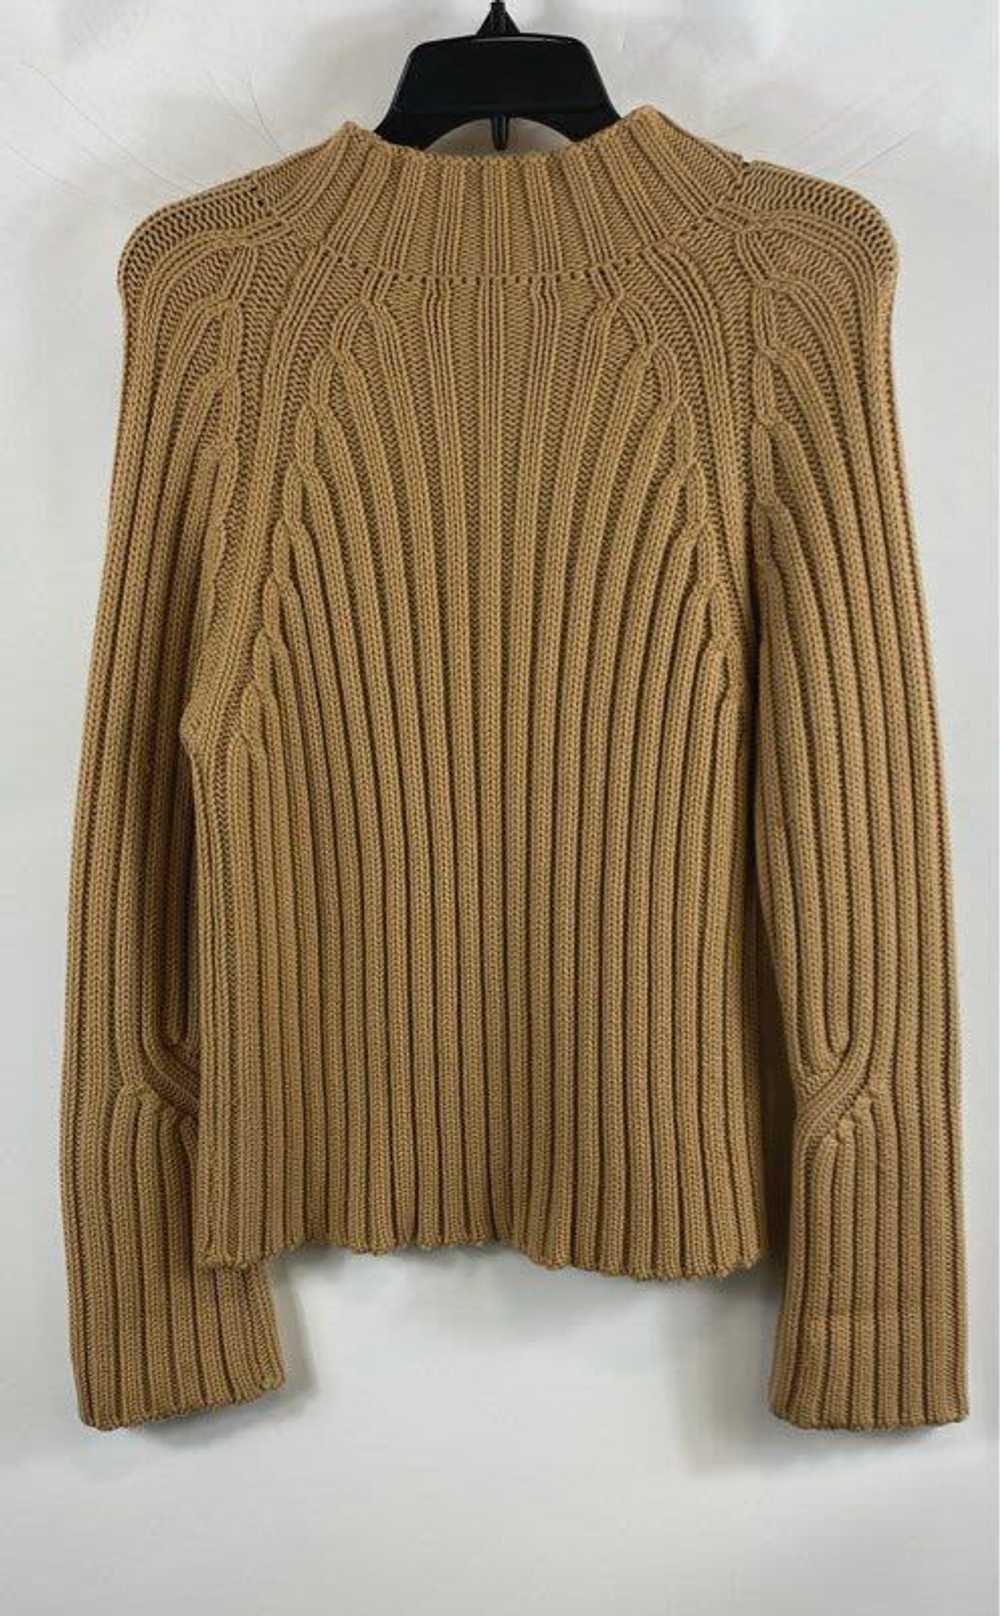 Burberry London Brown Knit Sweater - Size L - image 2